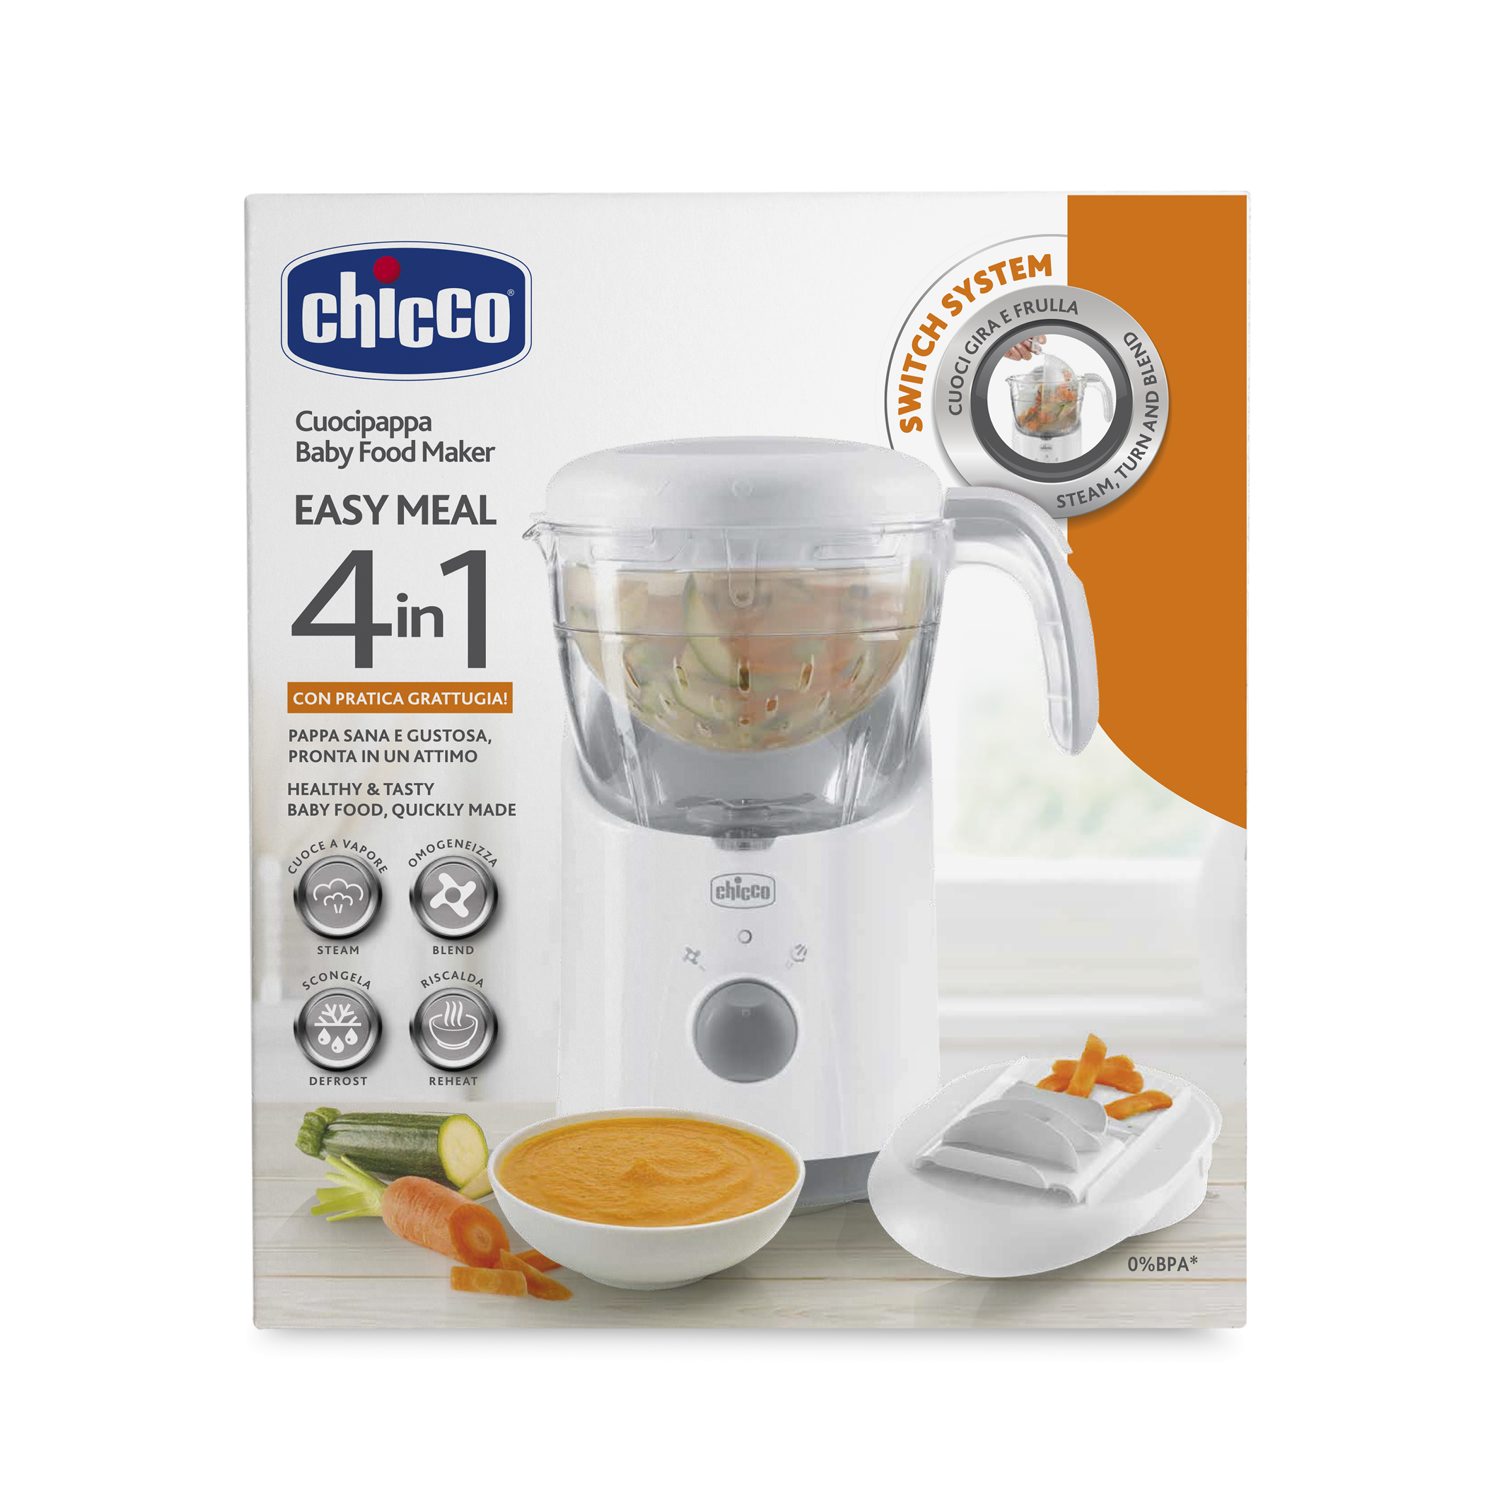 Easy meal cuocipappa chicco - Chicco